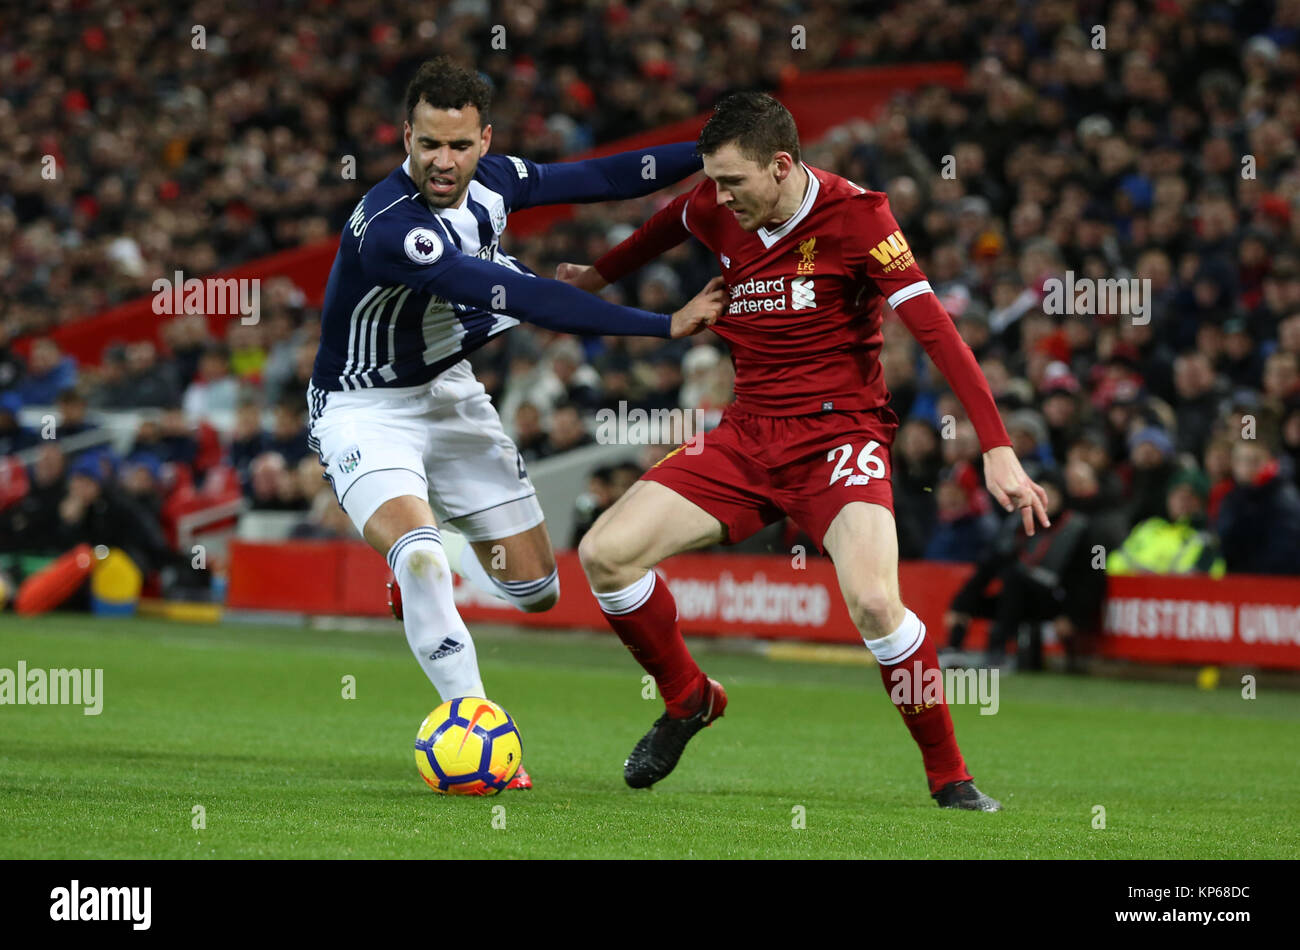 West Bromwich Albion's Hal Robson-Kanu and Liverpool's Andrew Robertson  battle for the ball during the Premier League match at Anfield, Liverpool  Stock Photo - Alamy